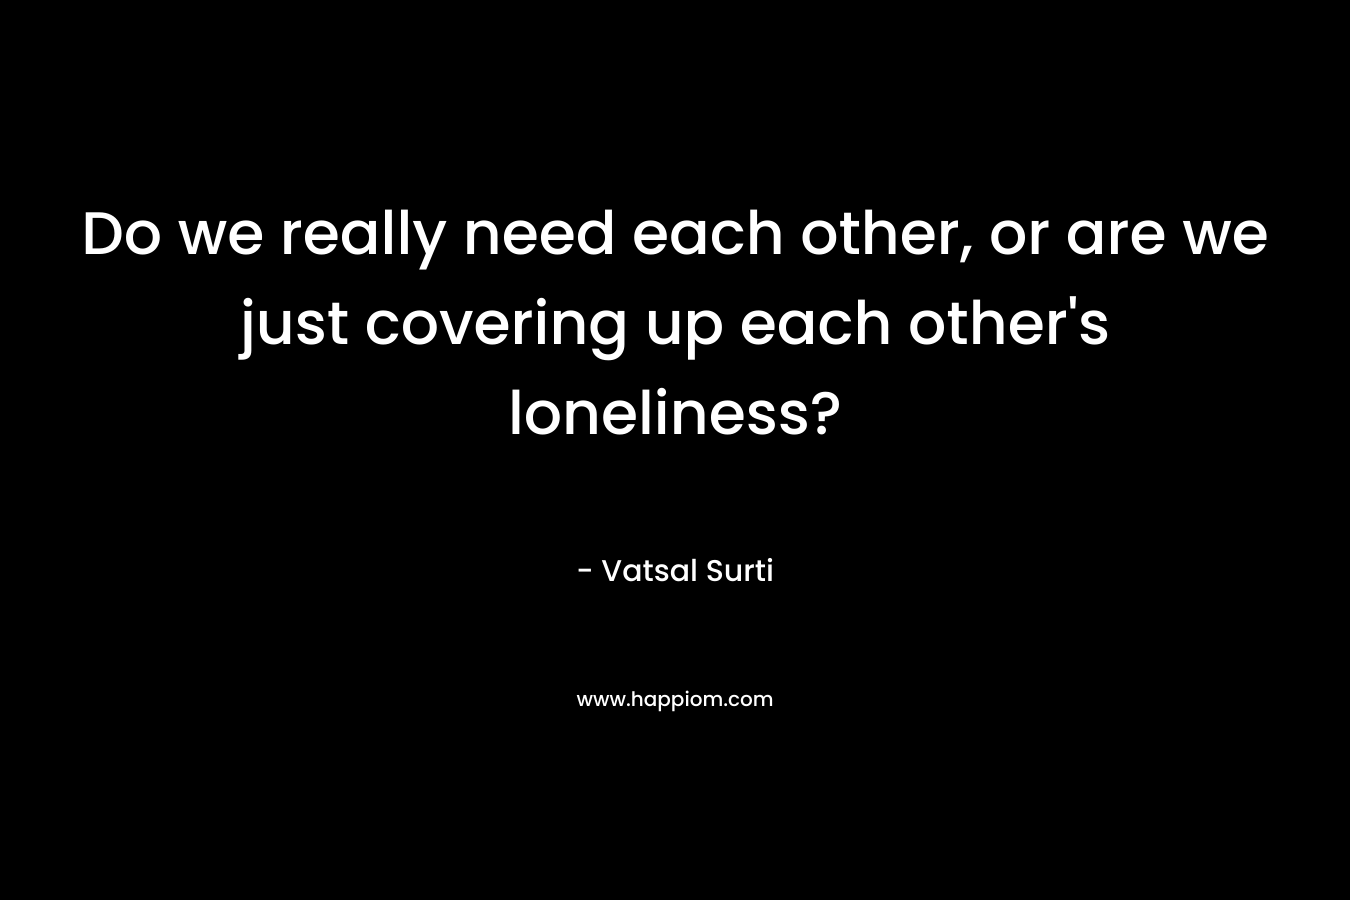 Do we really need each other, or are we just covering up each other's loneliness?